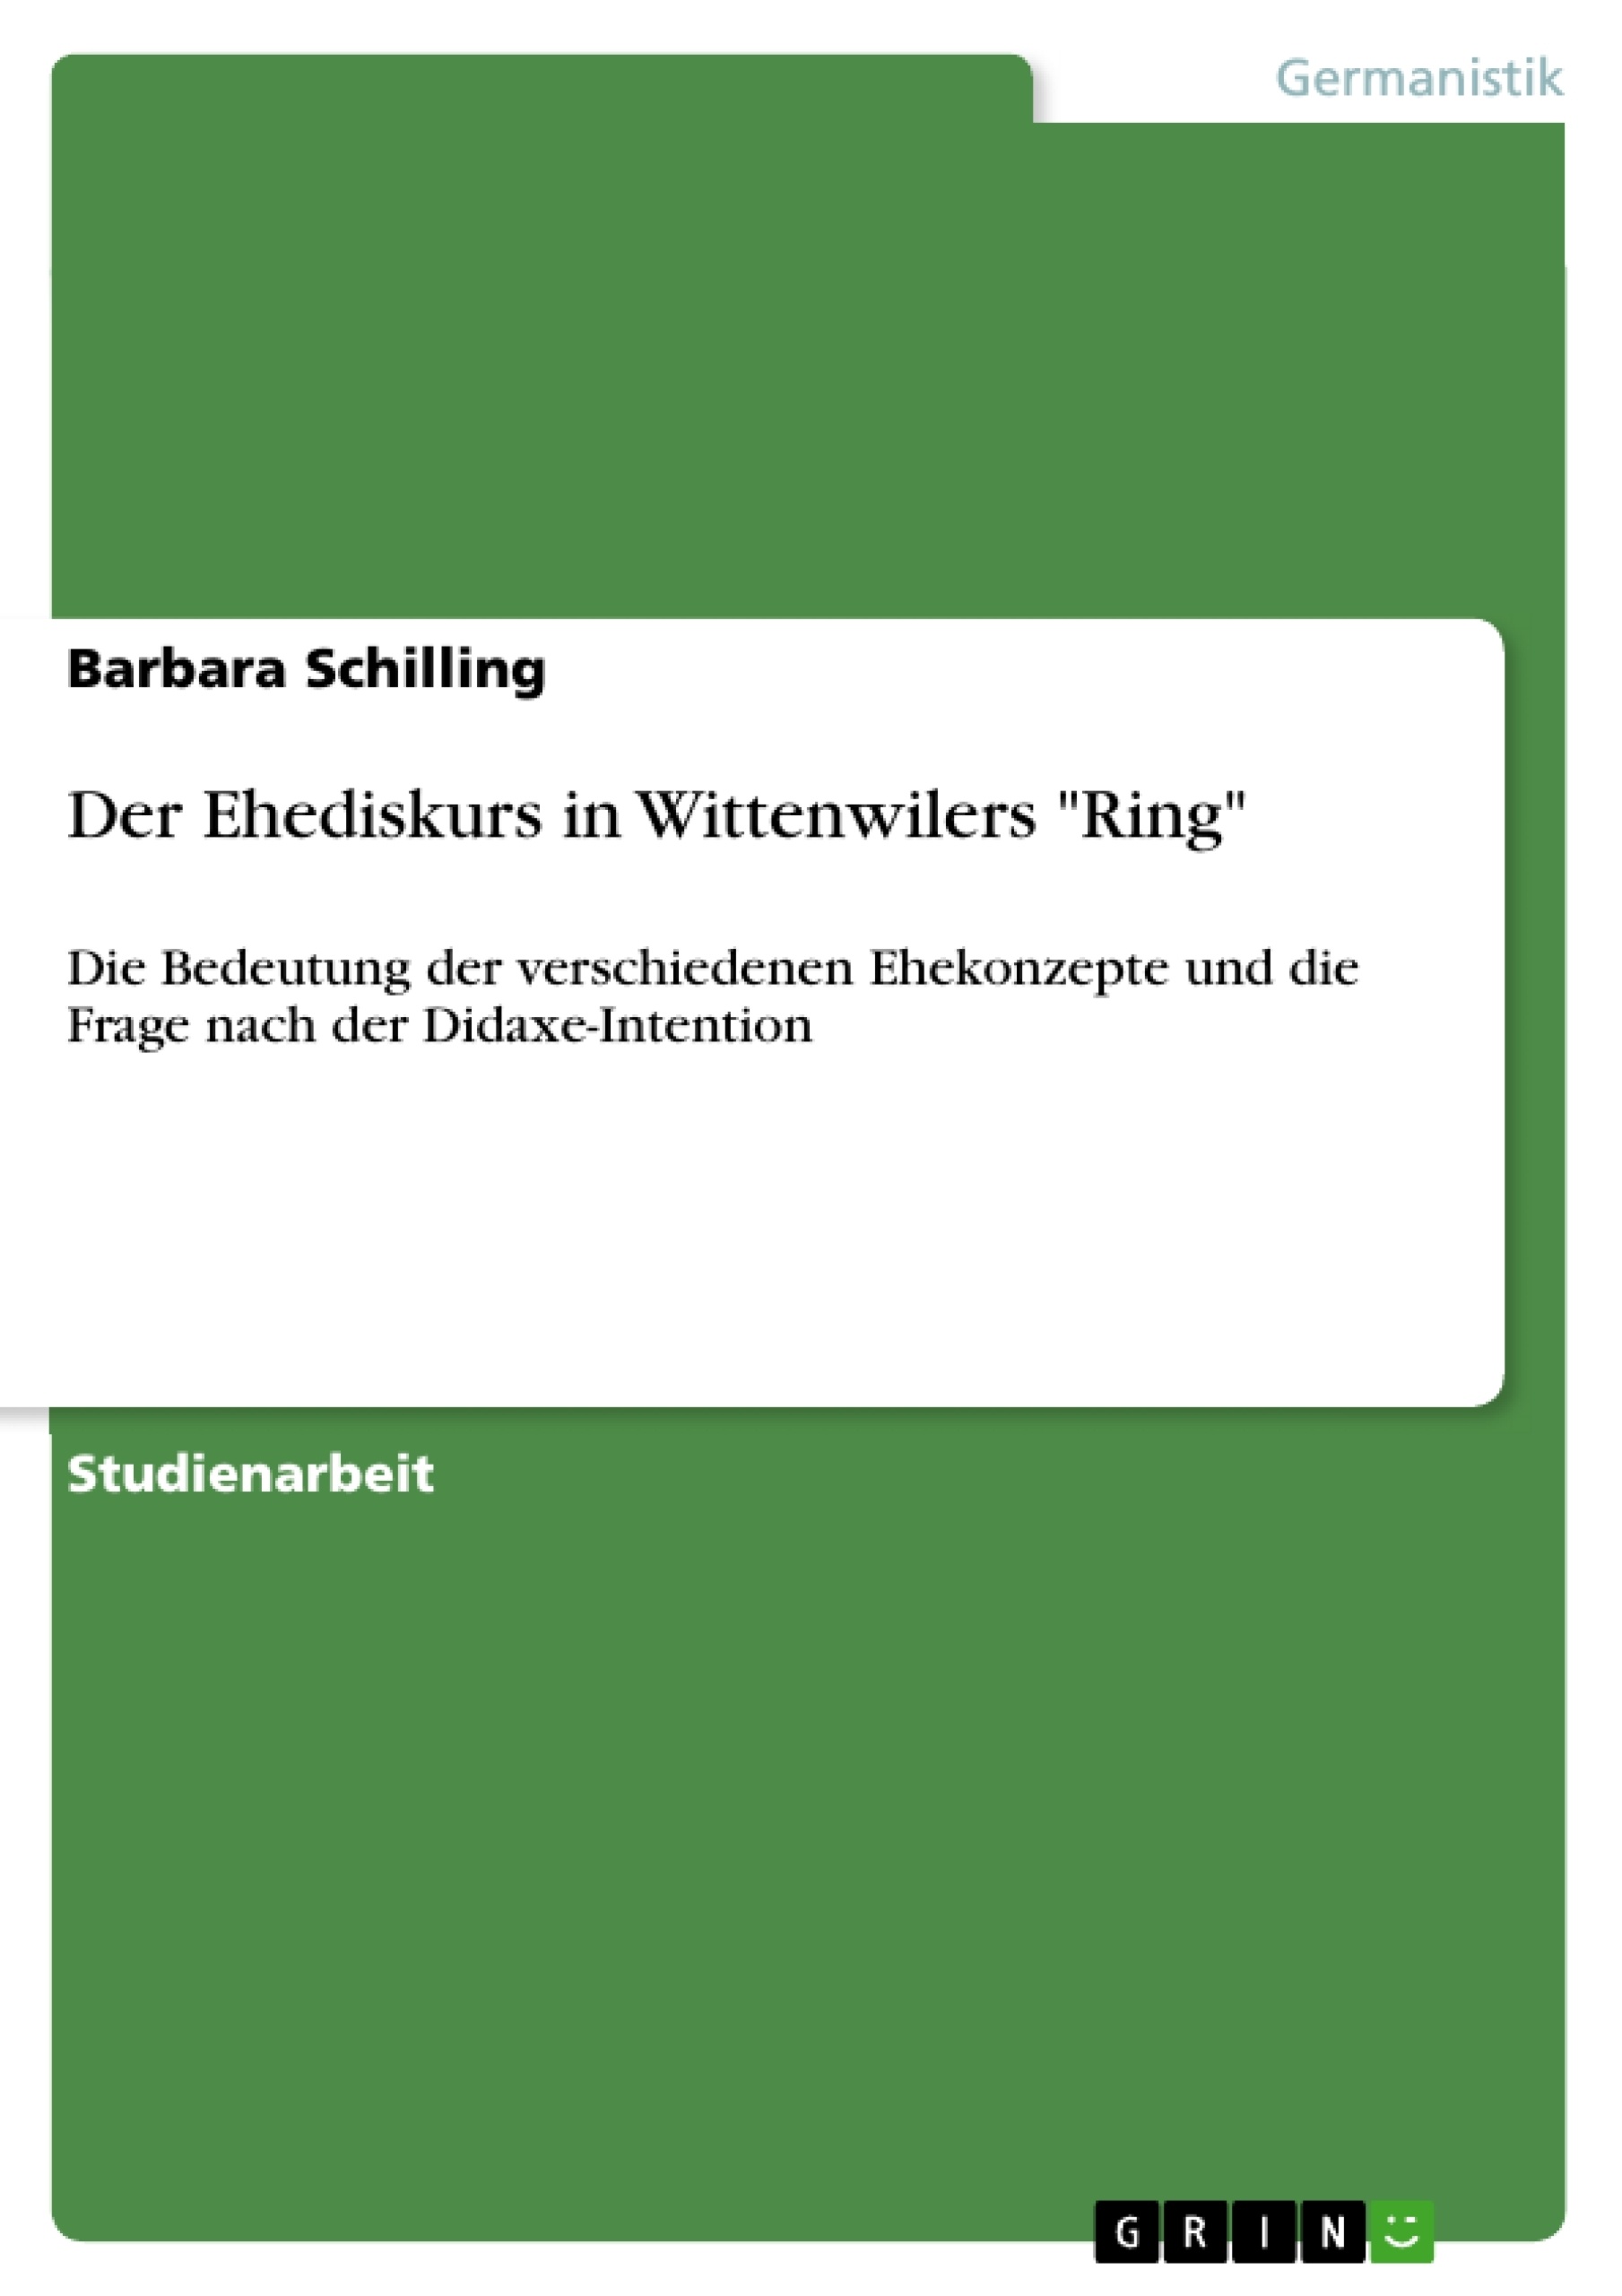 Title: Der Ehediskurs in Wittenwilers "Ring"